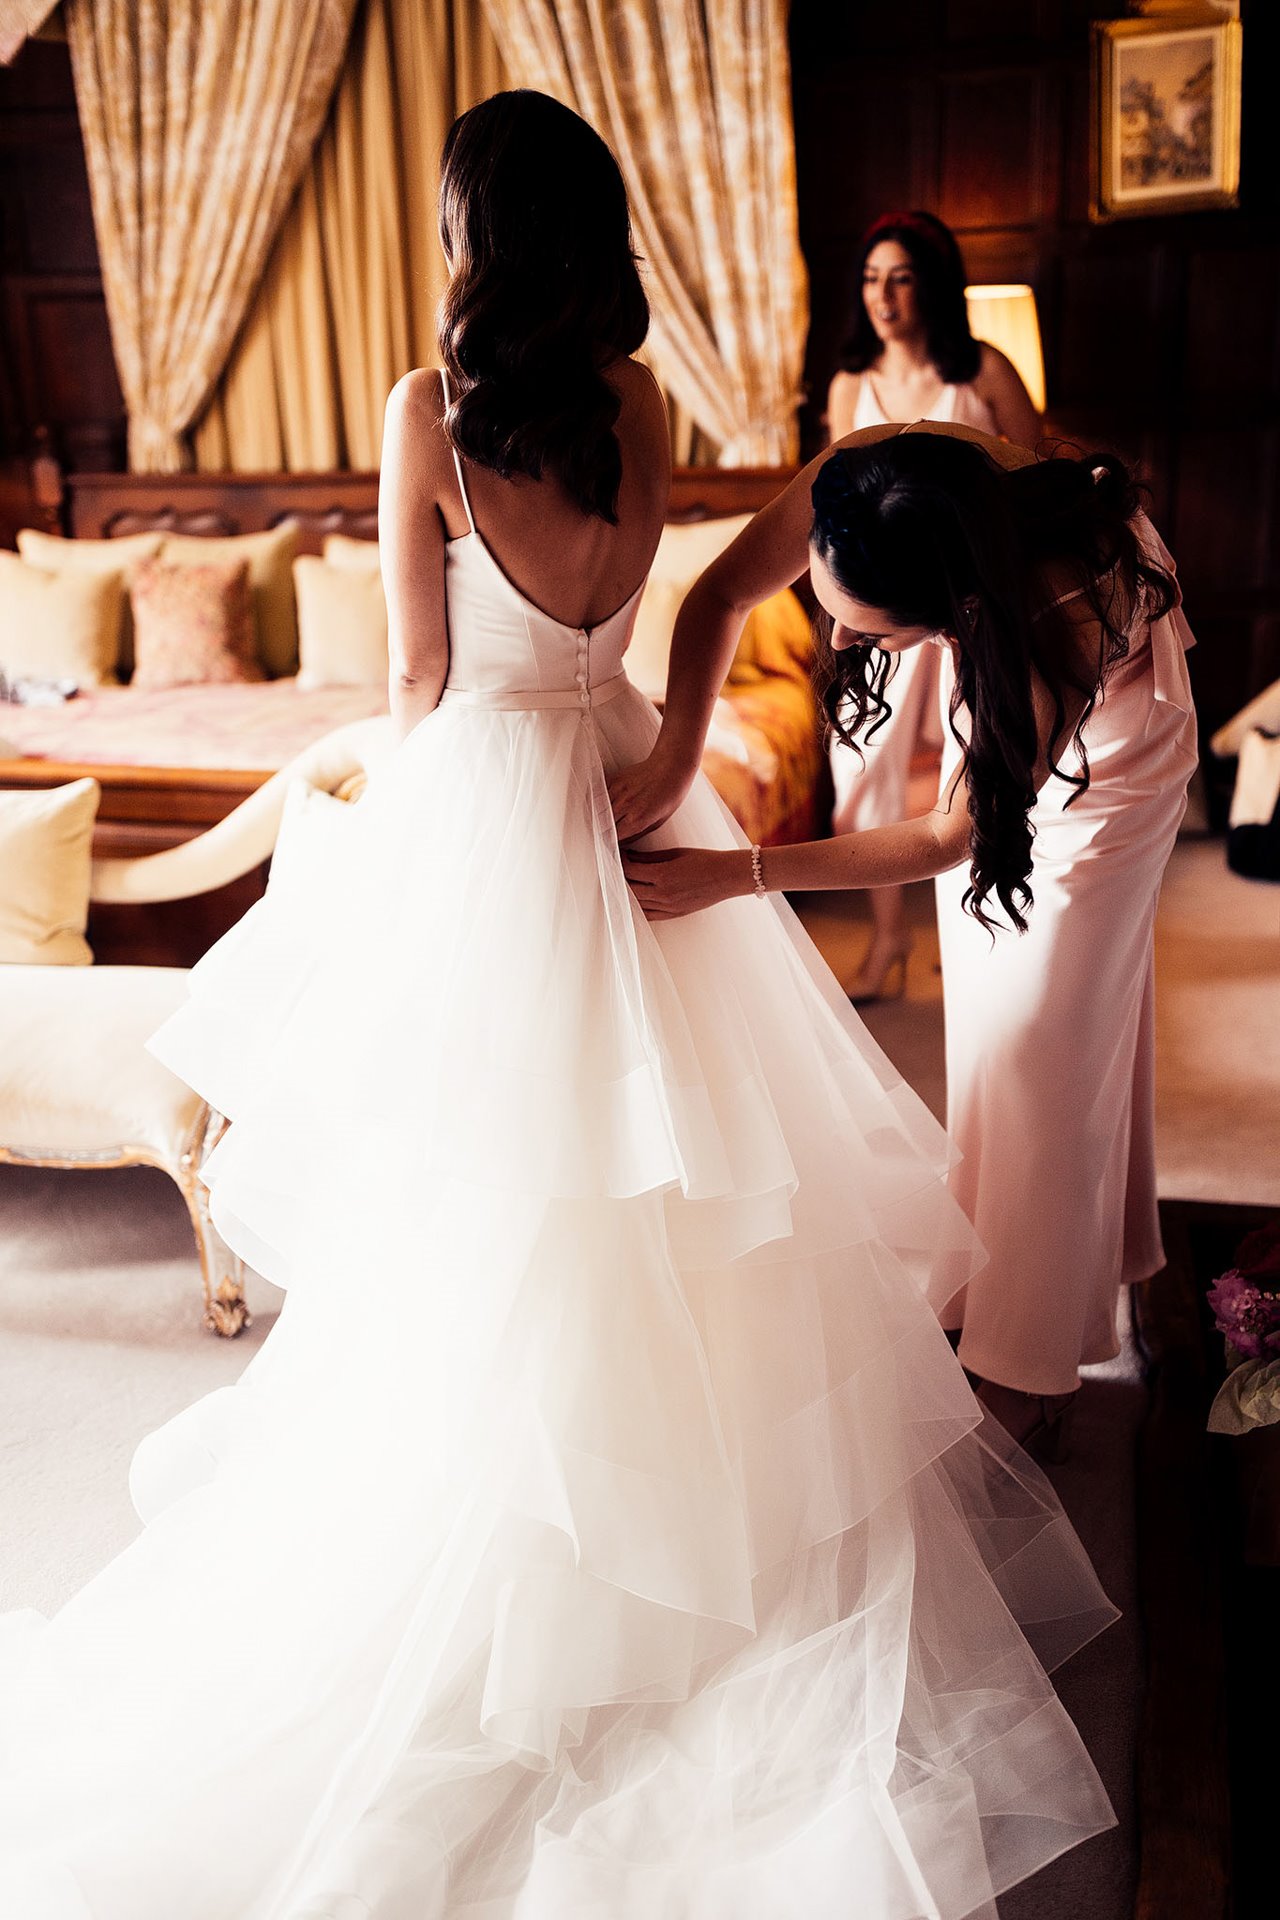 This bride had three wedding dress changes. here she is putting on her ceremony dress with huge skirt